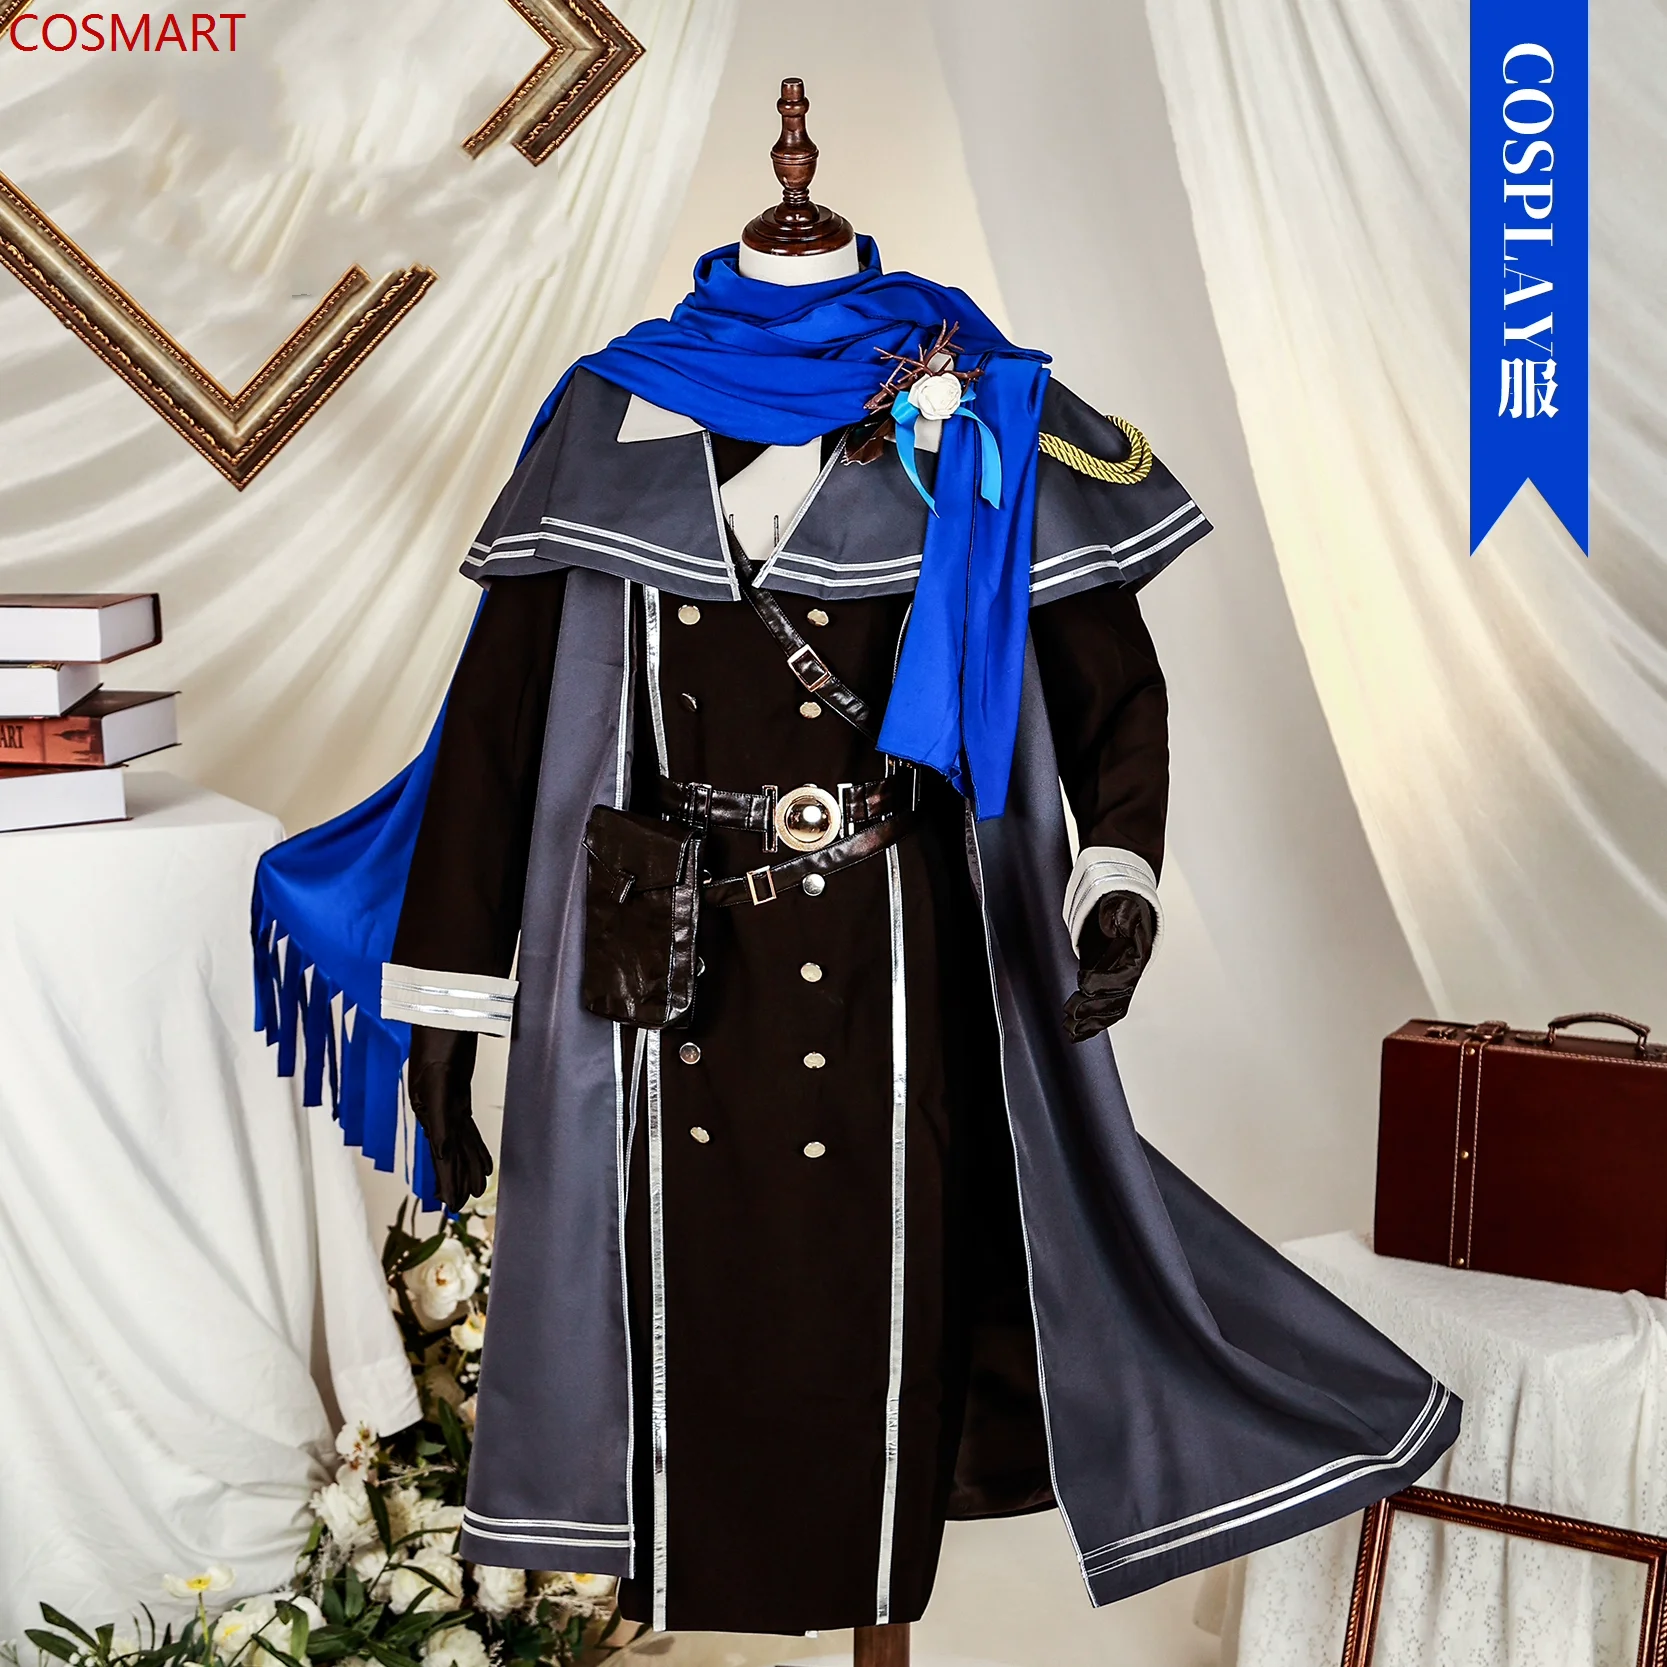 

COSMART Reverse:1999 Bkornblume Ladies Cosplay Costume Cos Game Anime Party Uniform Hallowen Play Role Clothes Clothing